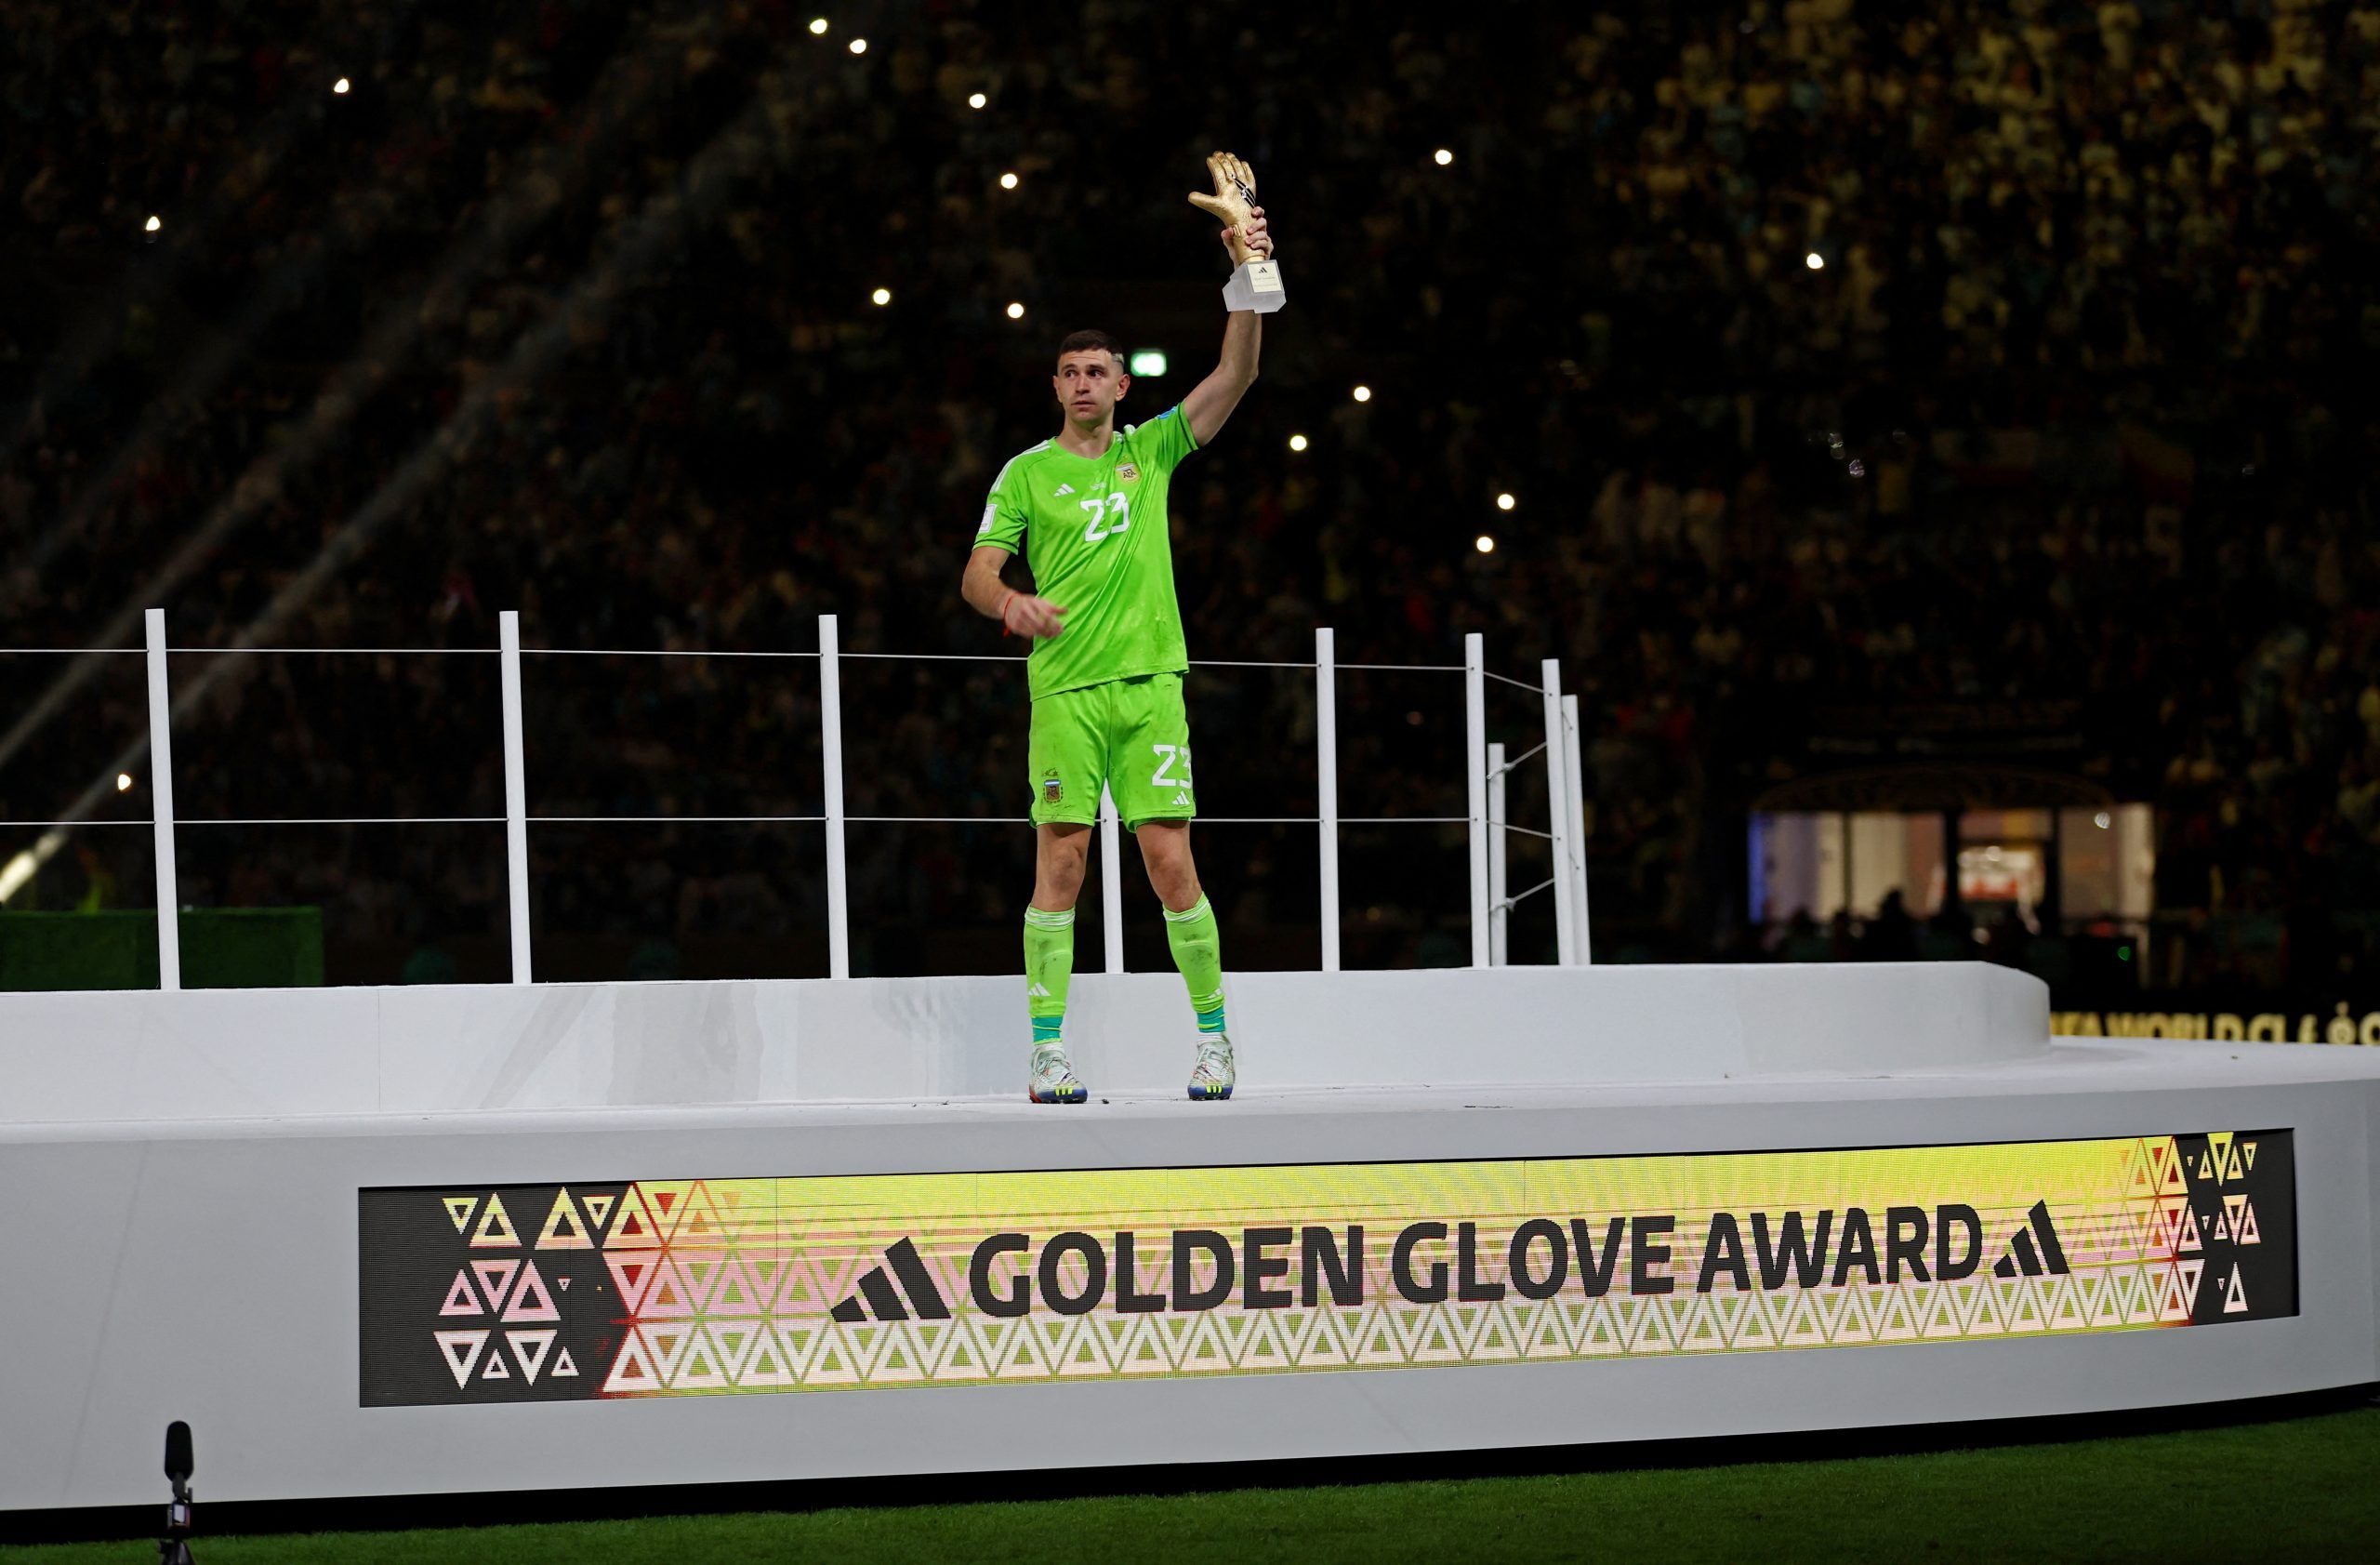 Soccer Football - FIFA World Cup Qatar 2022 - Final - Argentina v France - Lusail Stadium, Lusail, Qatar - December 18, 2022   Argentina's Emiliano Martinez poses for a photograph after he is awarded the golden glove award during the trophy ceremony REUTERS/Hannah Mckay